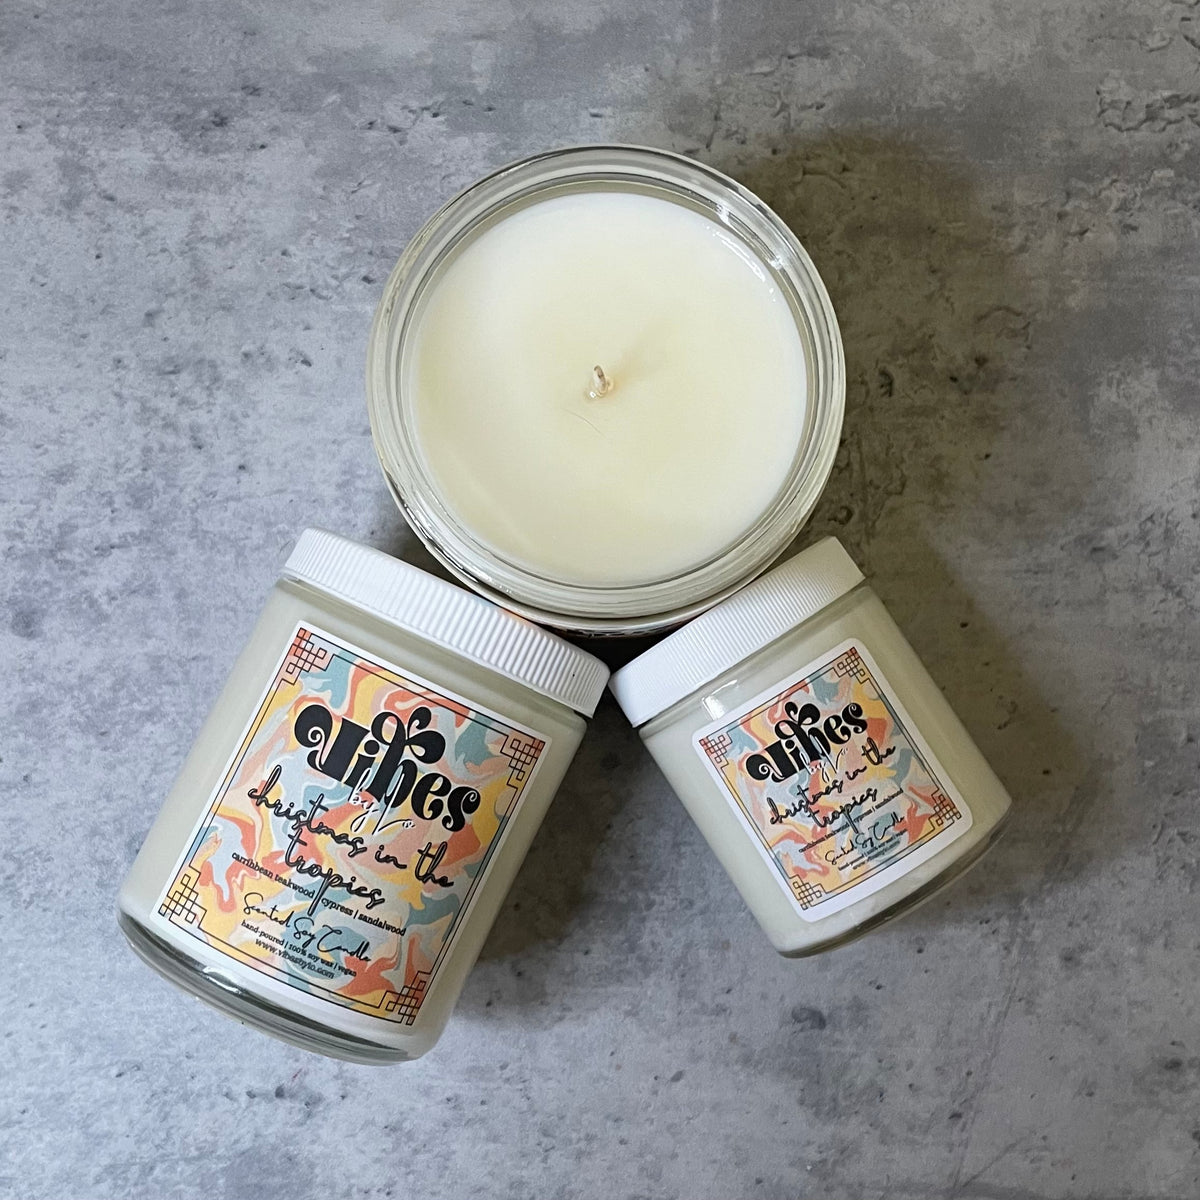 Coconut Lime x Caribbean Teakwood Soy Candle